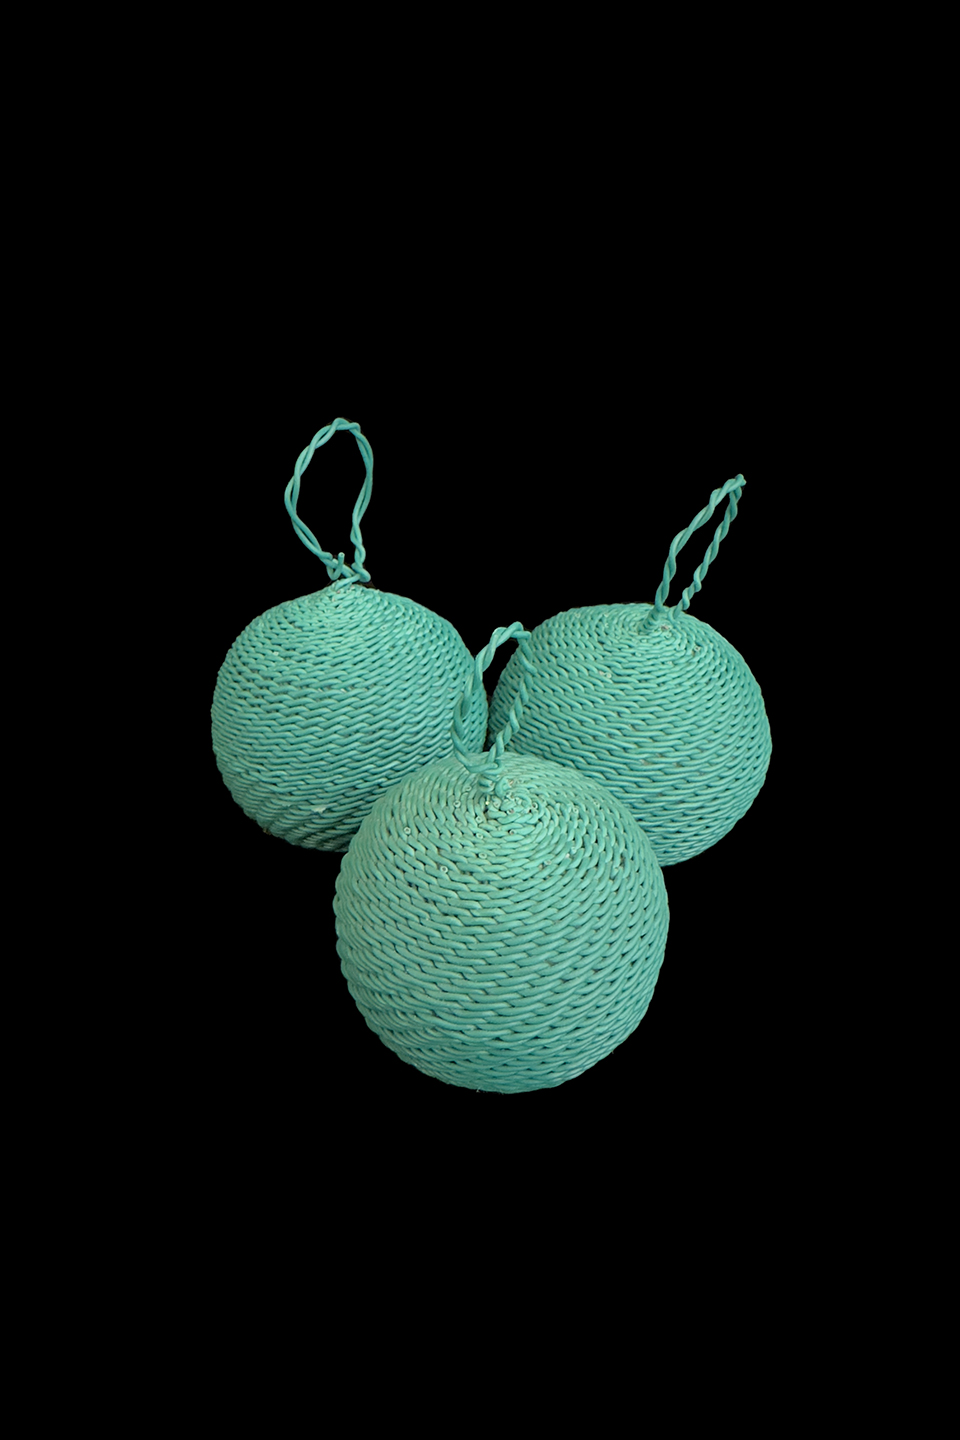 Set of 3 Turquoise/Teal Telephone Cable Wire Ball Ornaments - South Africa (1 set left)